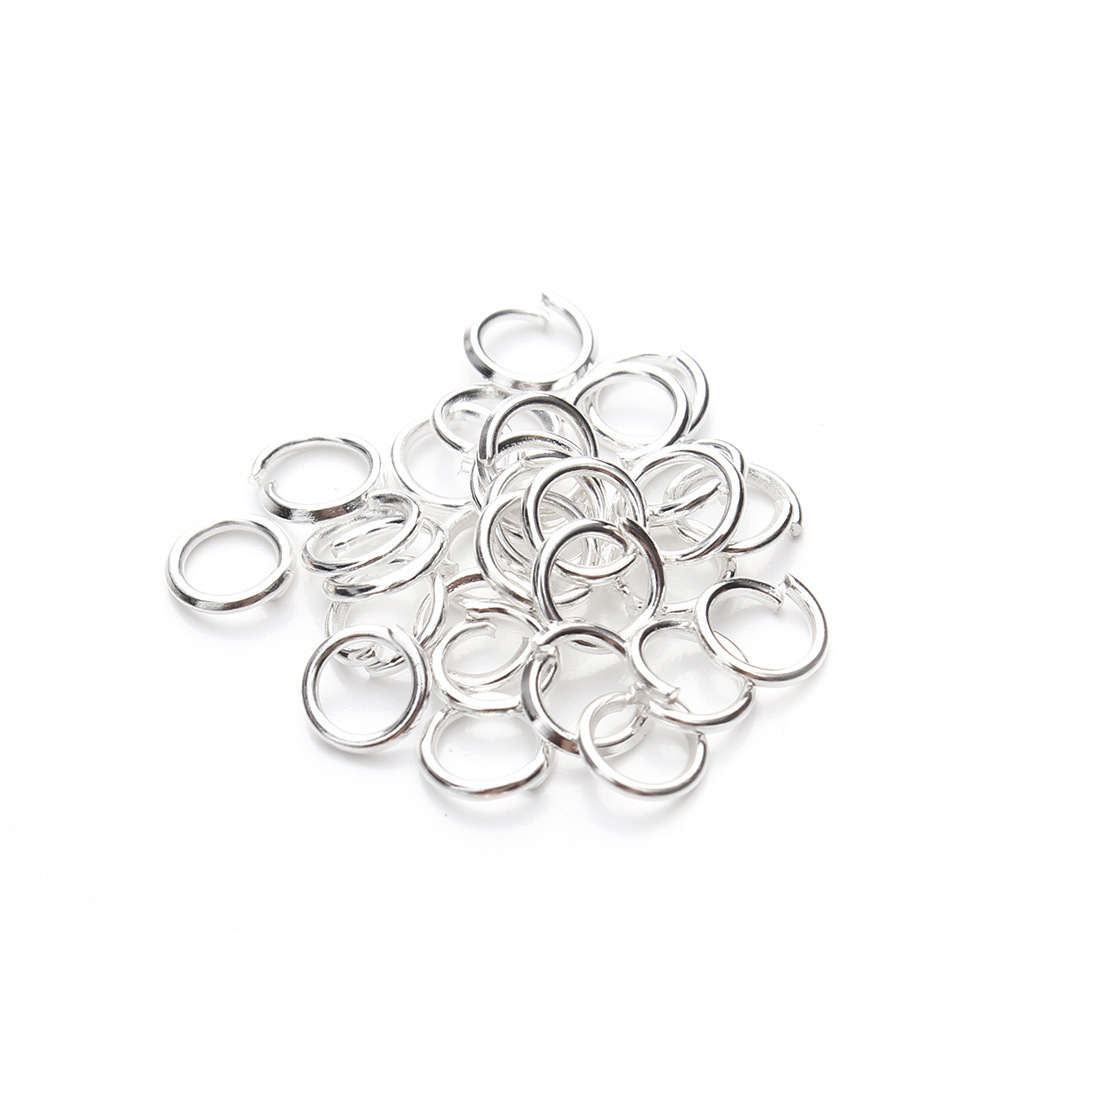 Silver outer diameter 4mm